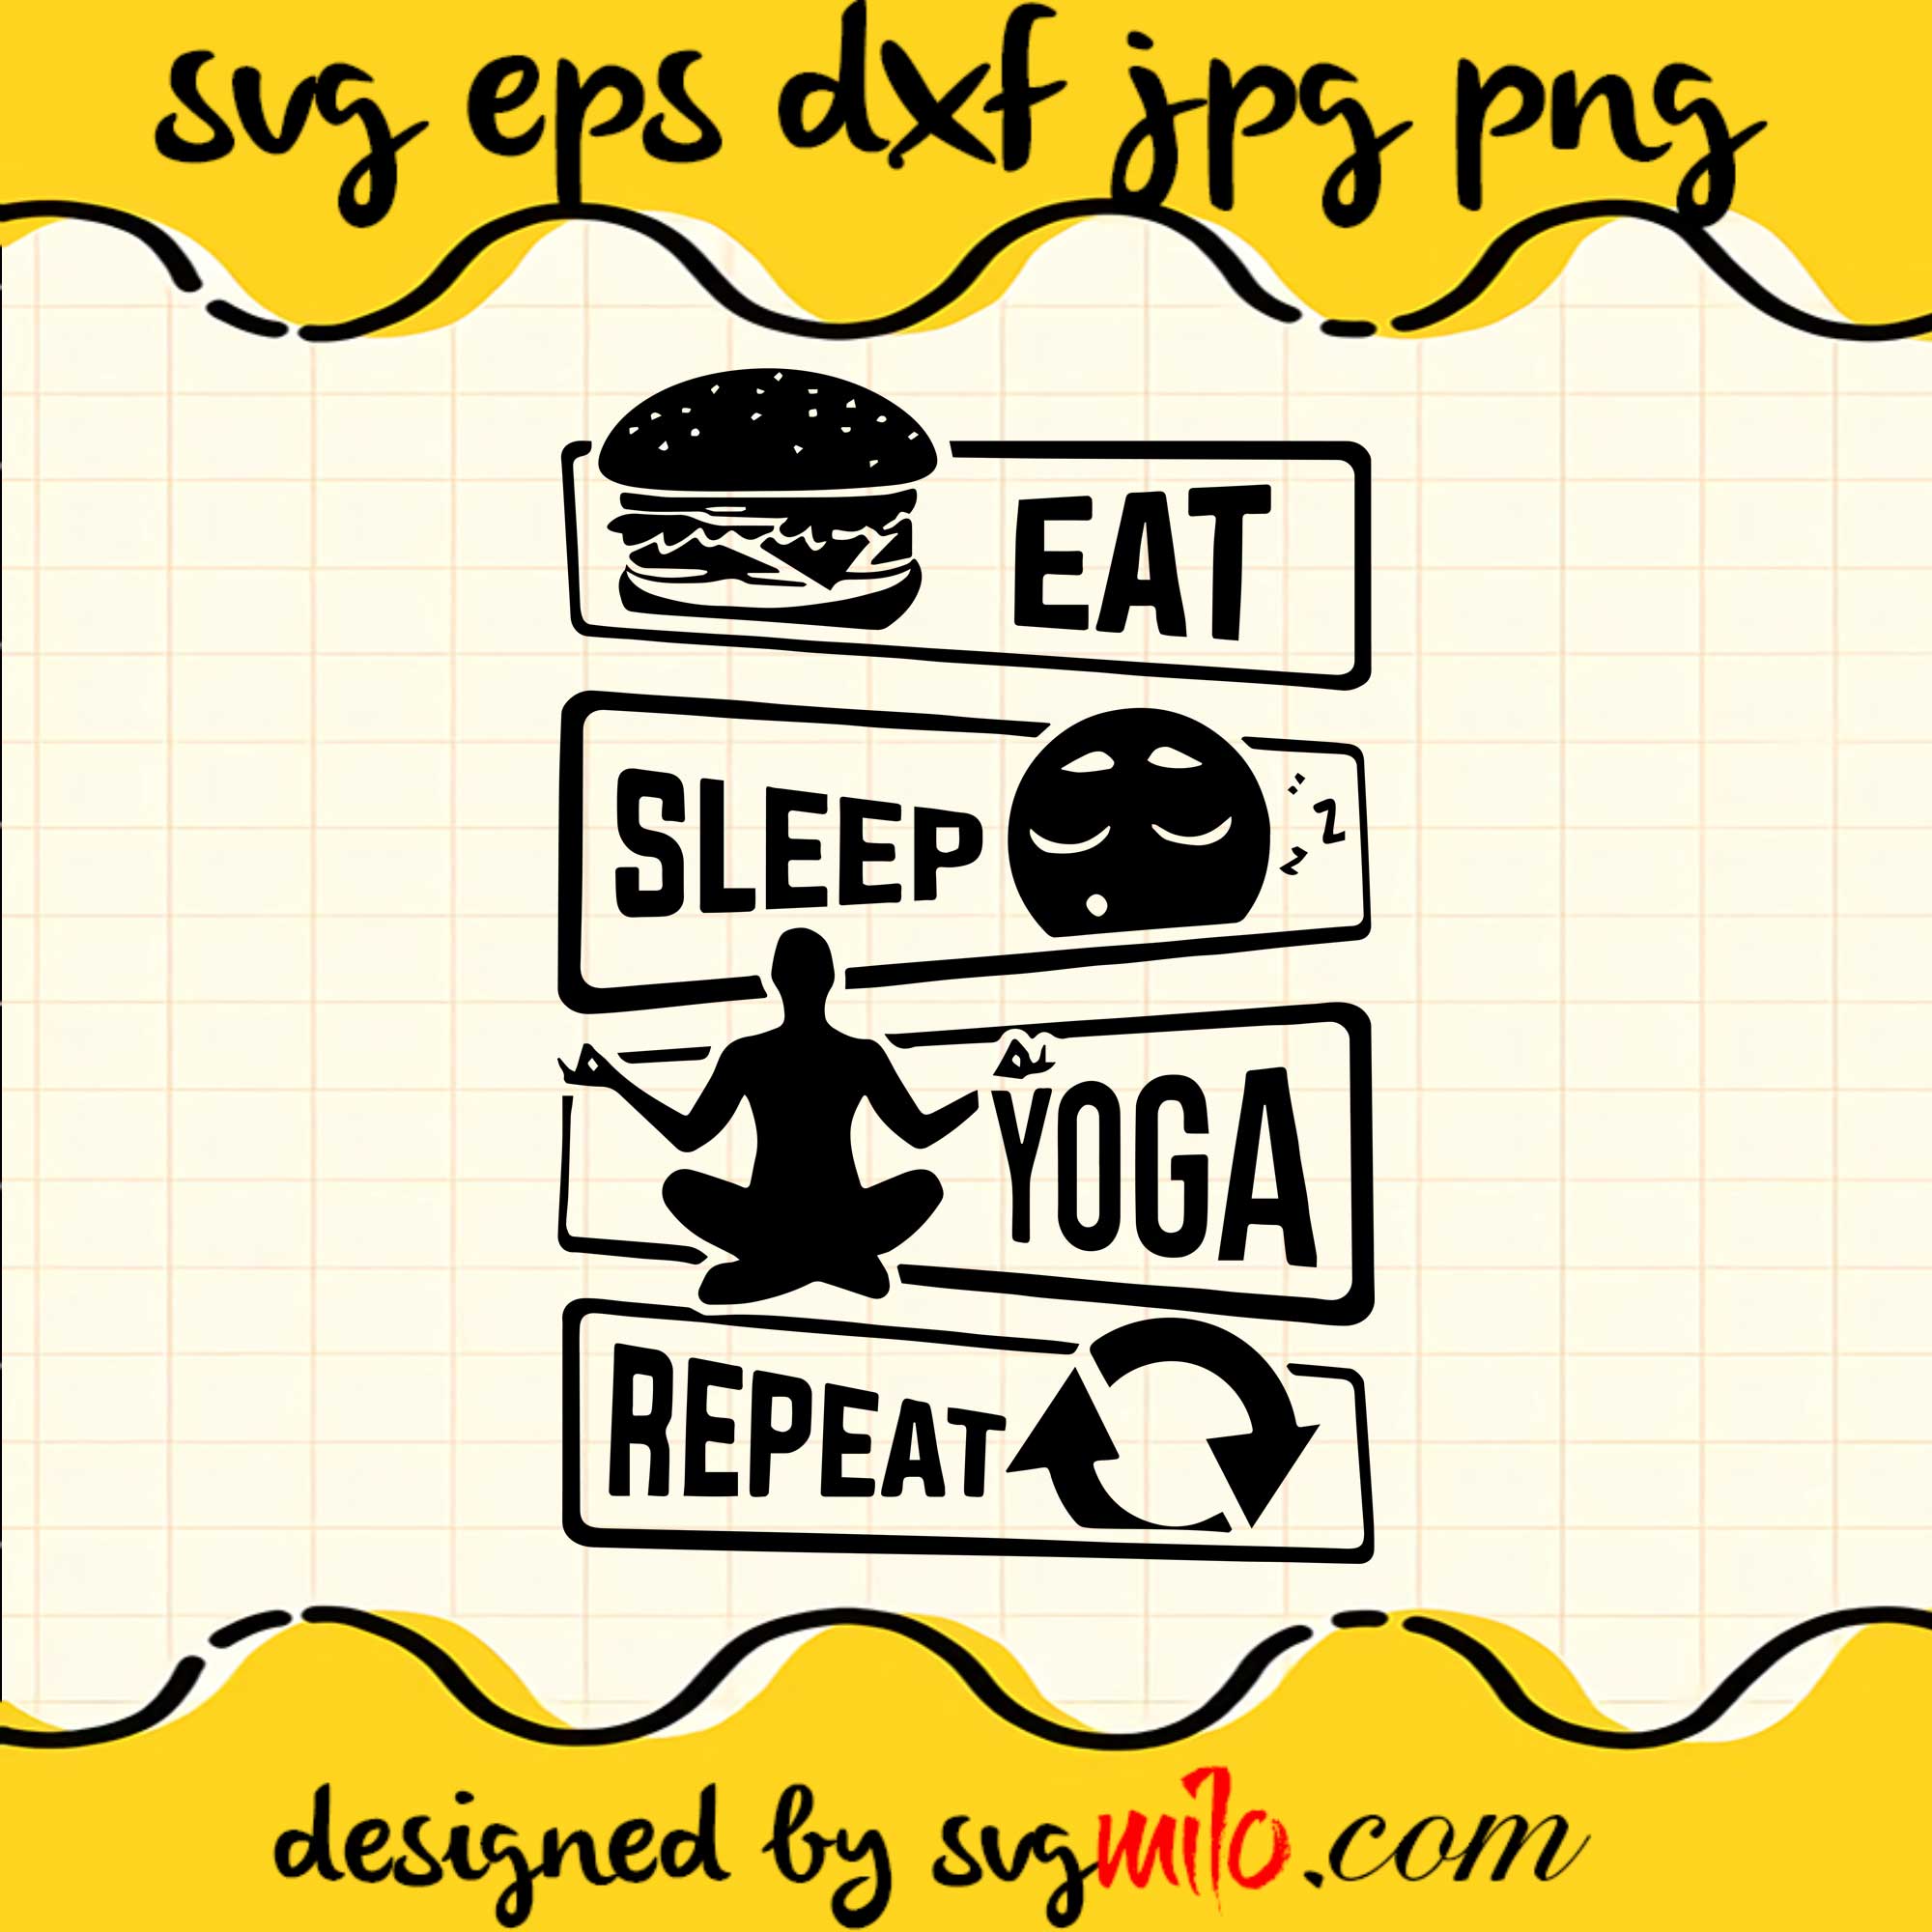 Eat Sleep Yoga Repeat SVG PNG DXF EPS Cut Files For Cricut Silhouette,Premium quality SVG - SVGMILO